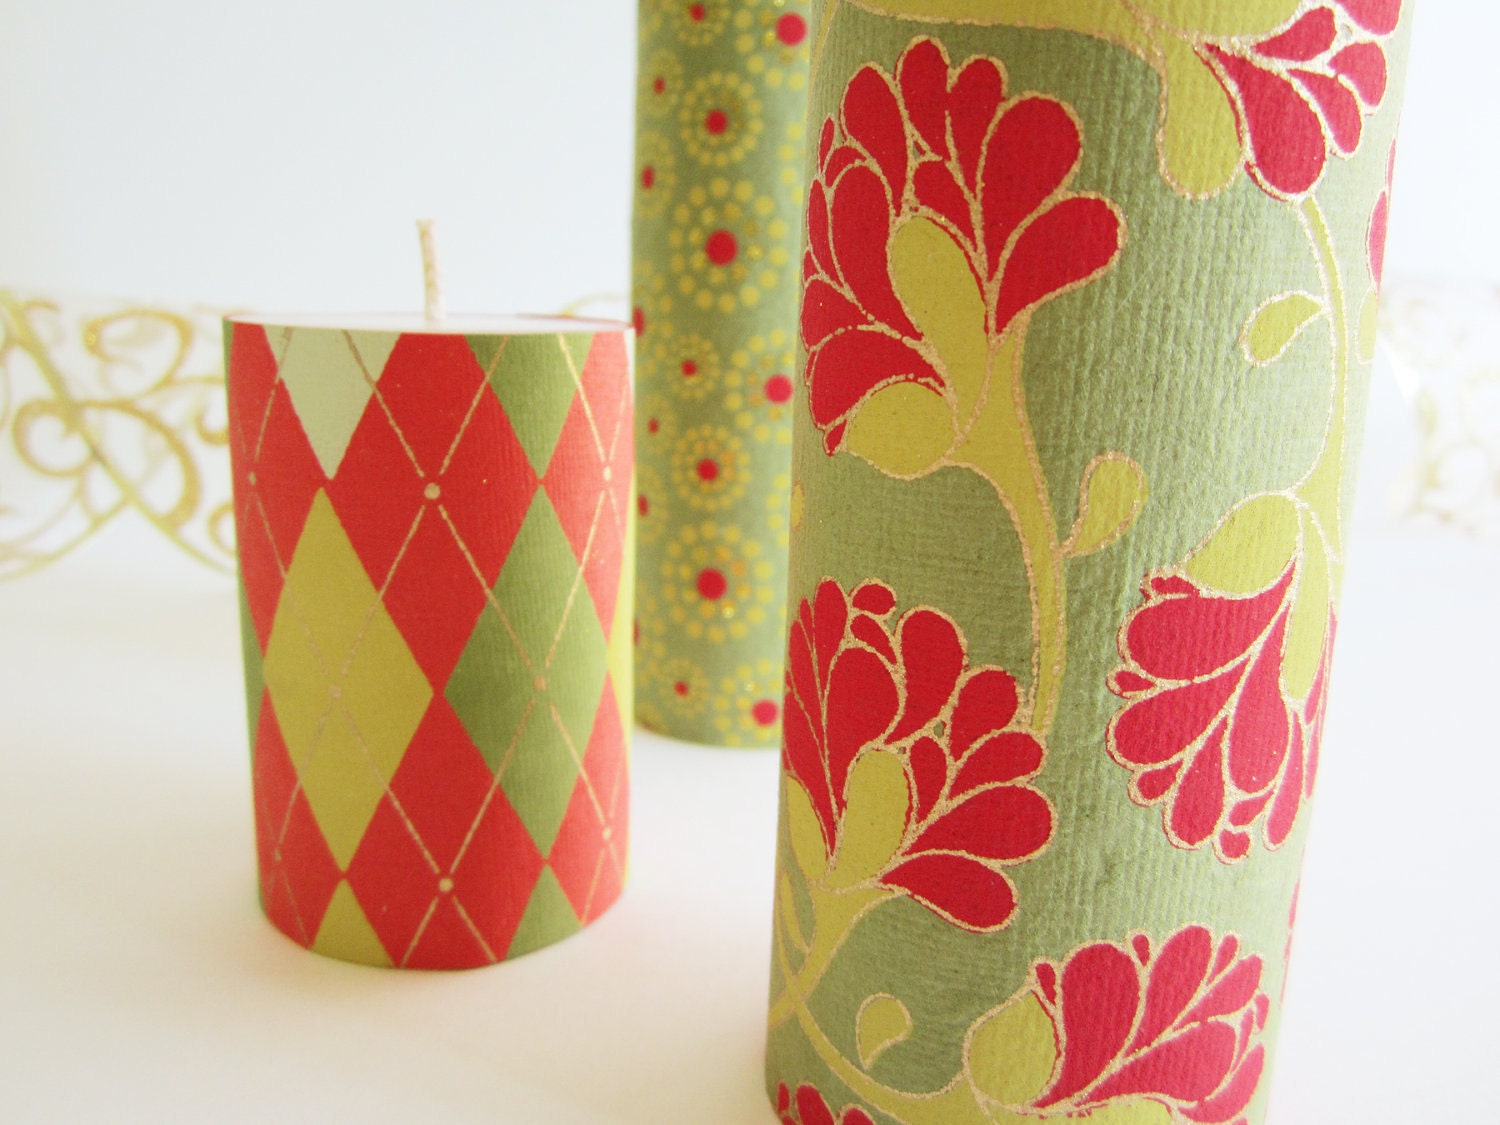 Set of Three Pillar Candles Wrapped and Decorated for the Holidays with Handmade Indian Paper: Argyle, Floral and Concentric Dots on Moss